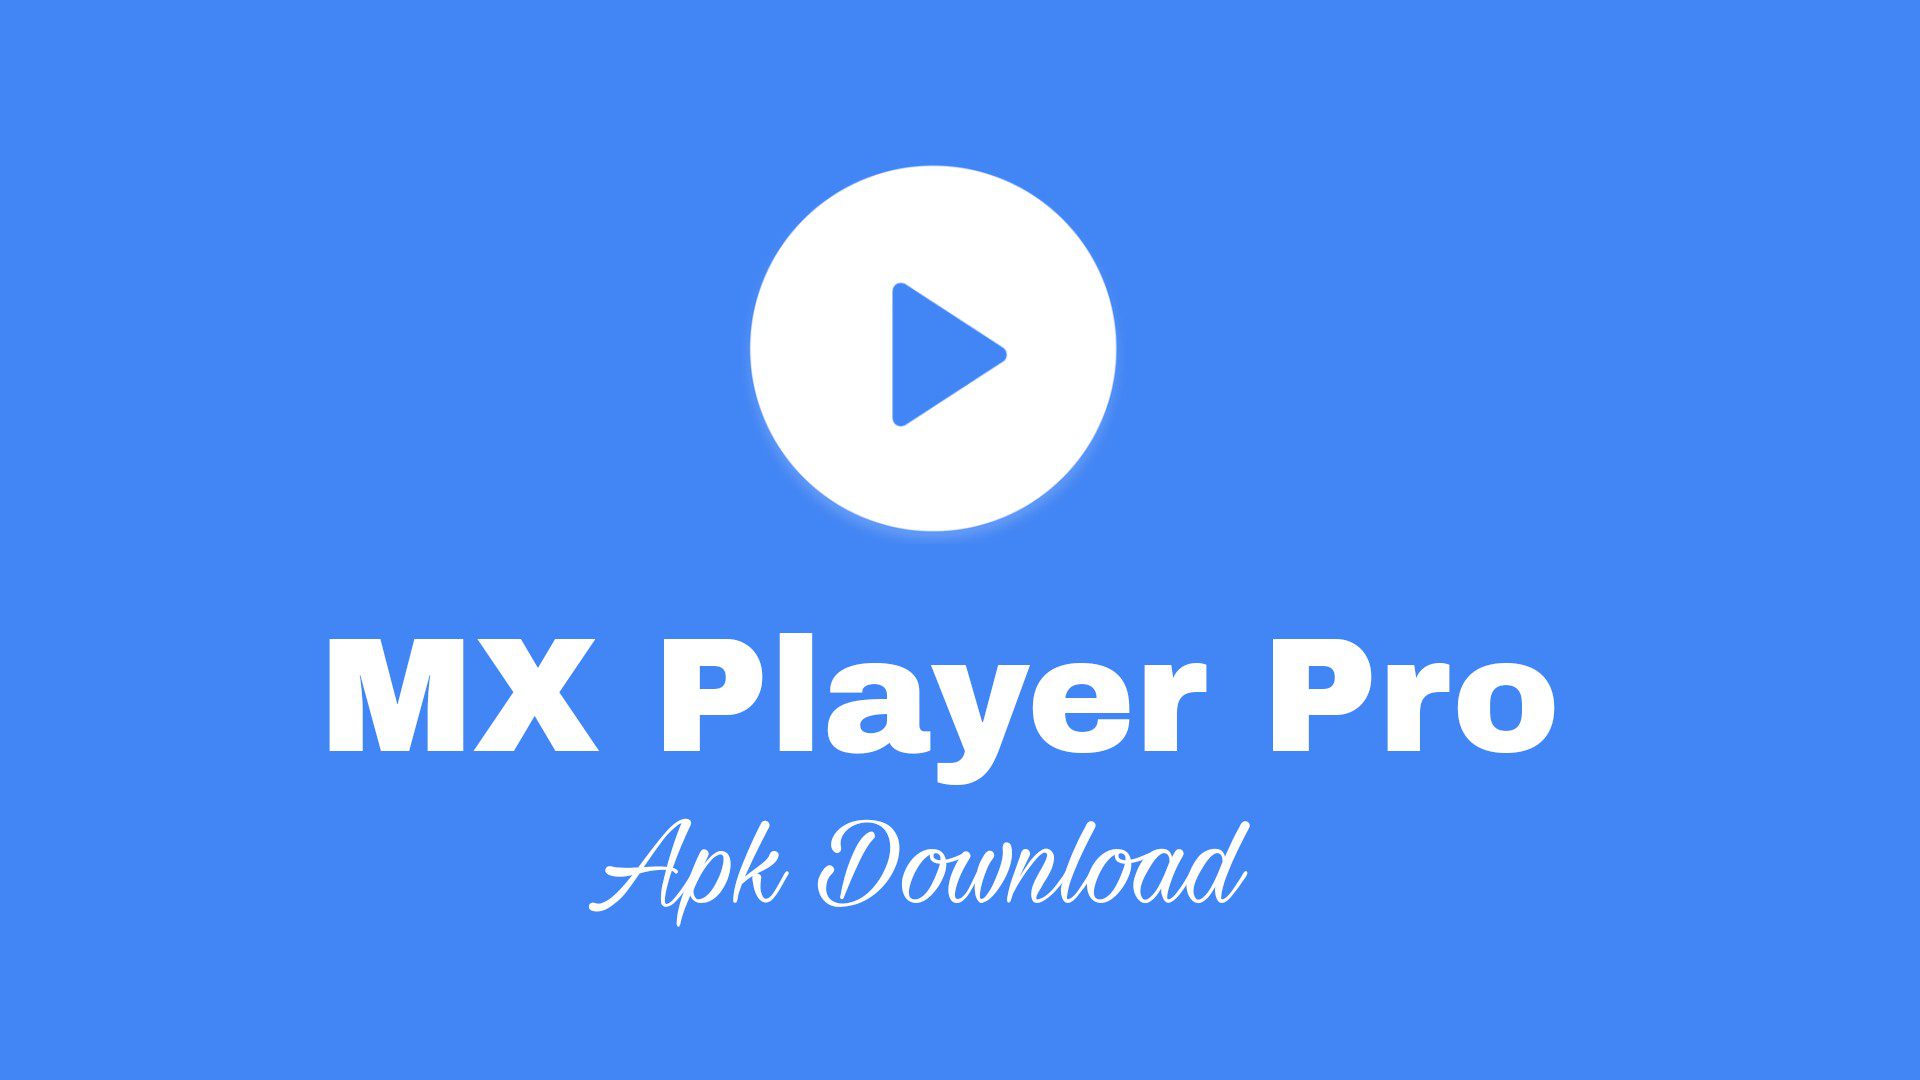 "Image: MX Player Pro APK download. Alt text: A cracked version of MX Player Pro, available for download as an APK file."